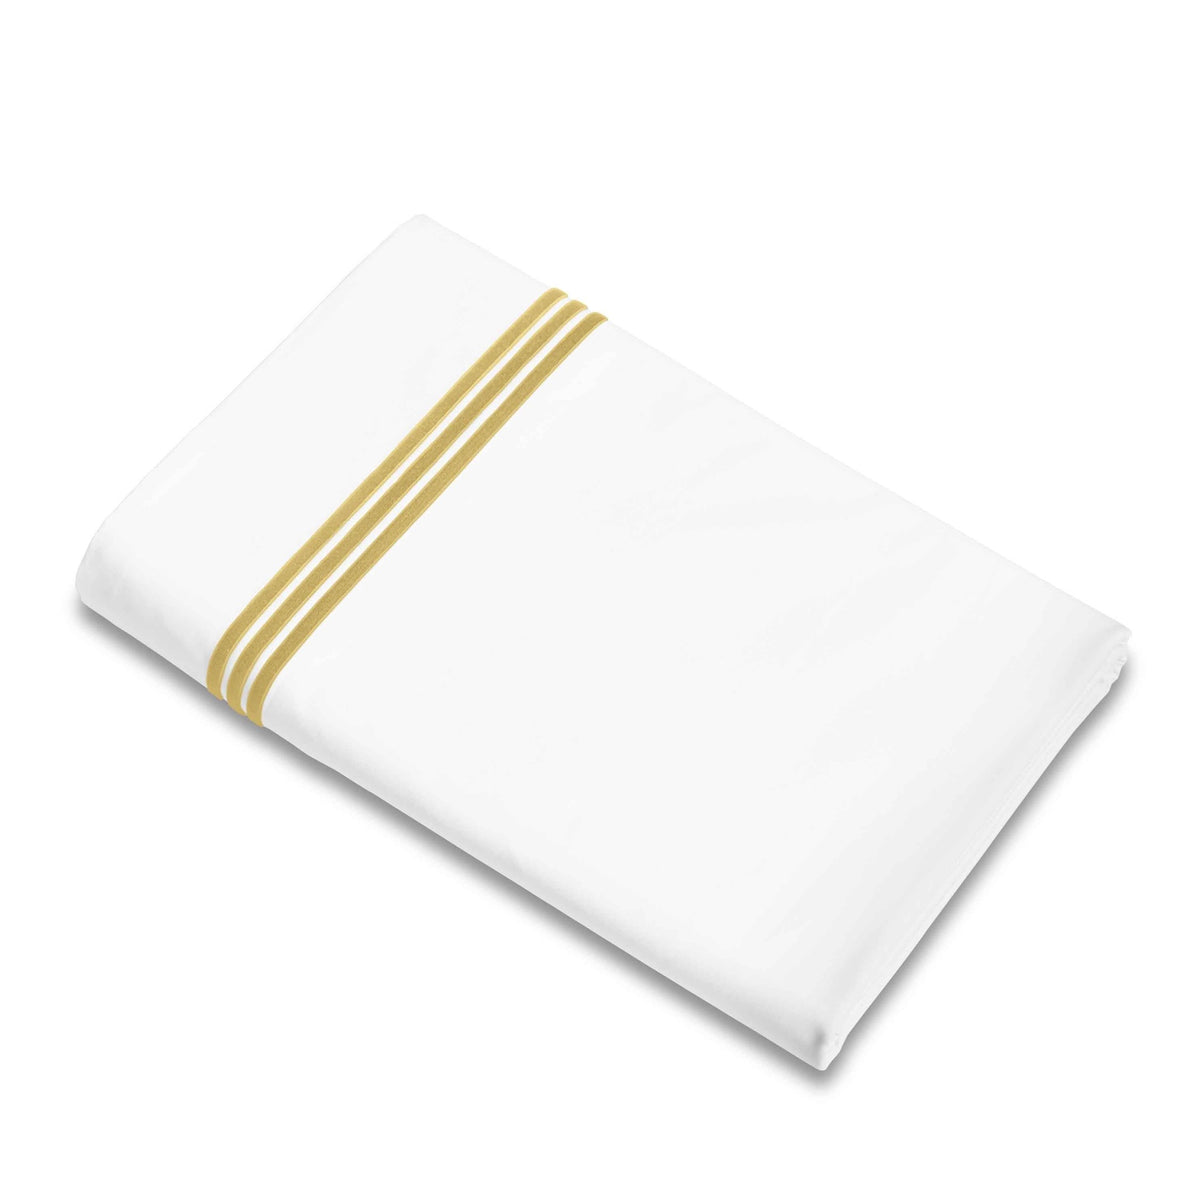 Flat Sheet of Signoria Platinum Percale Bedding in White/Gold Color